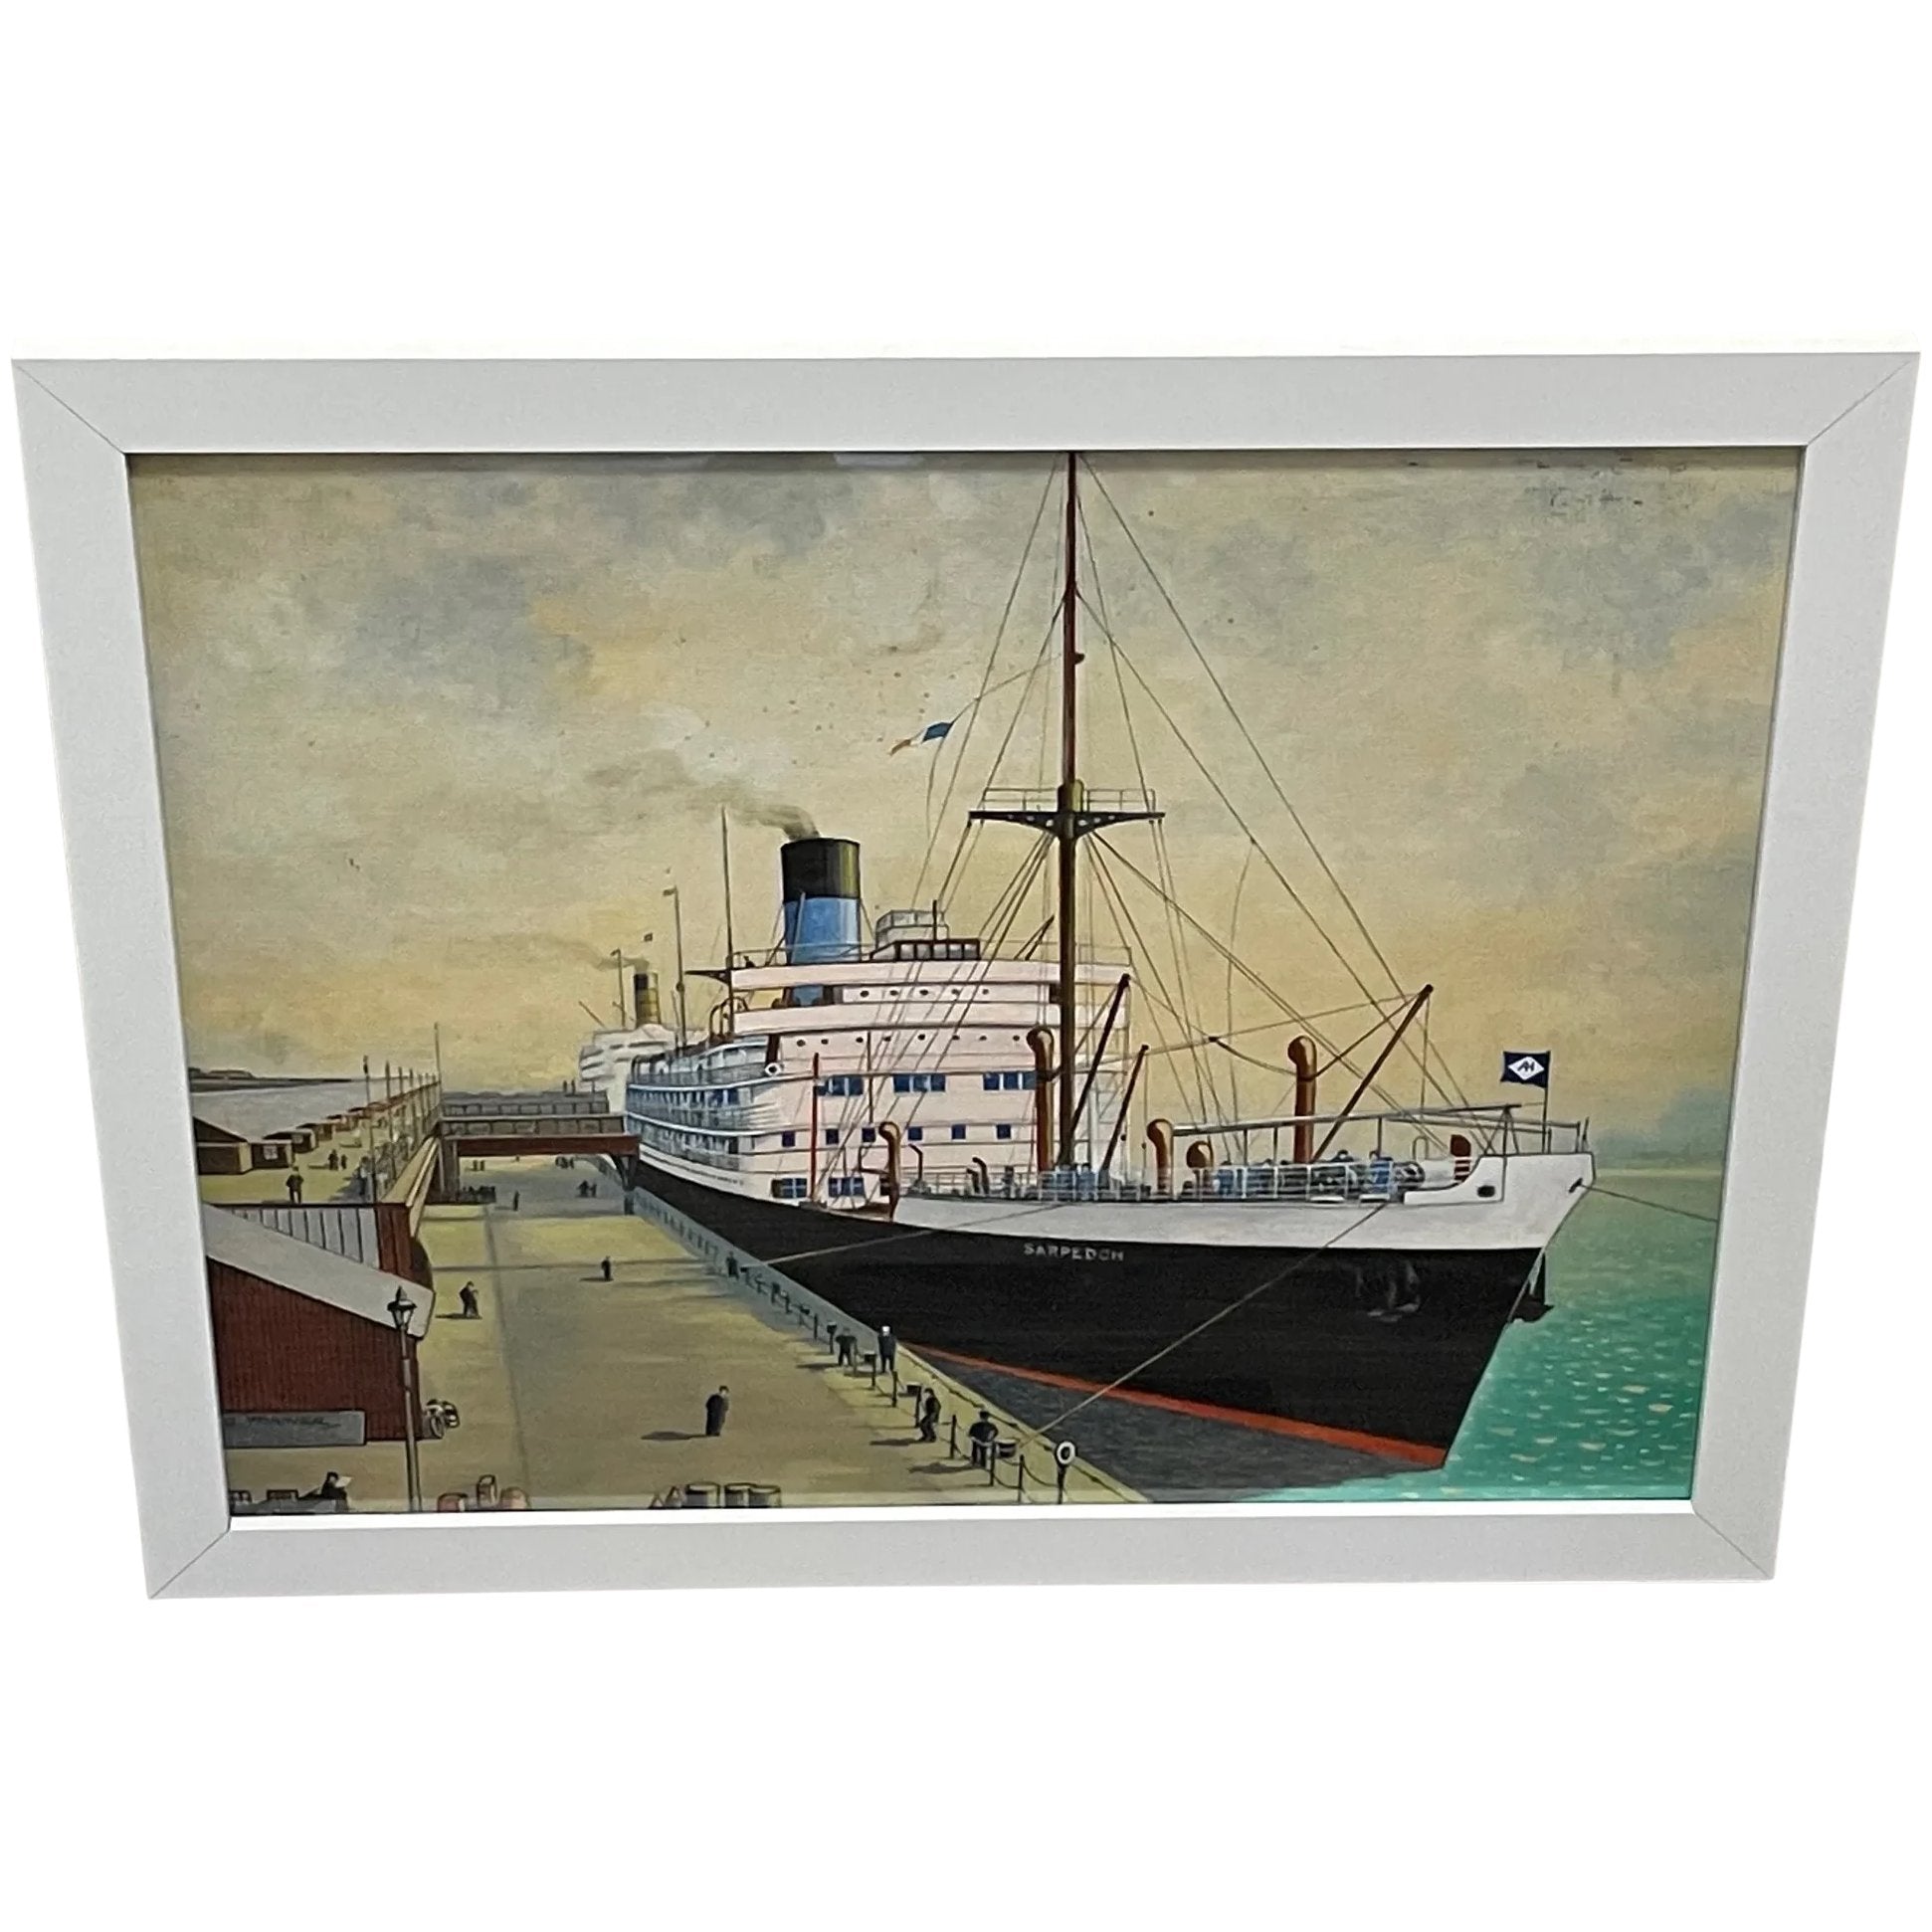 Trans Pacific Steamship Sarpedon Docked Liverpool Landing Stage Ready To Sail - Cheshire Antiques Consultant